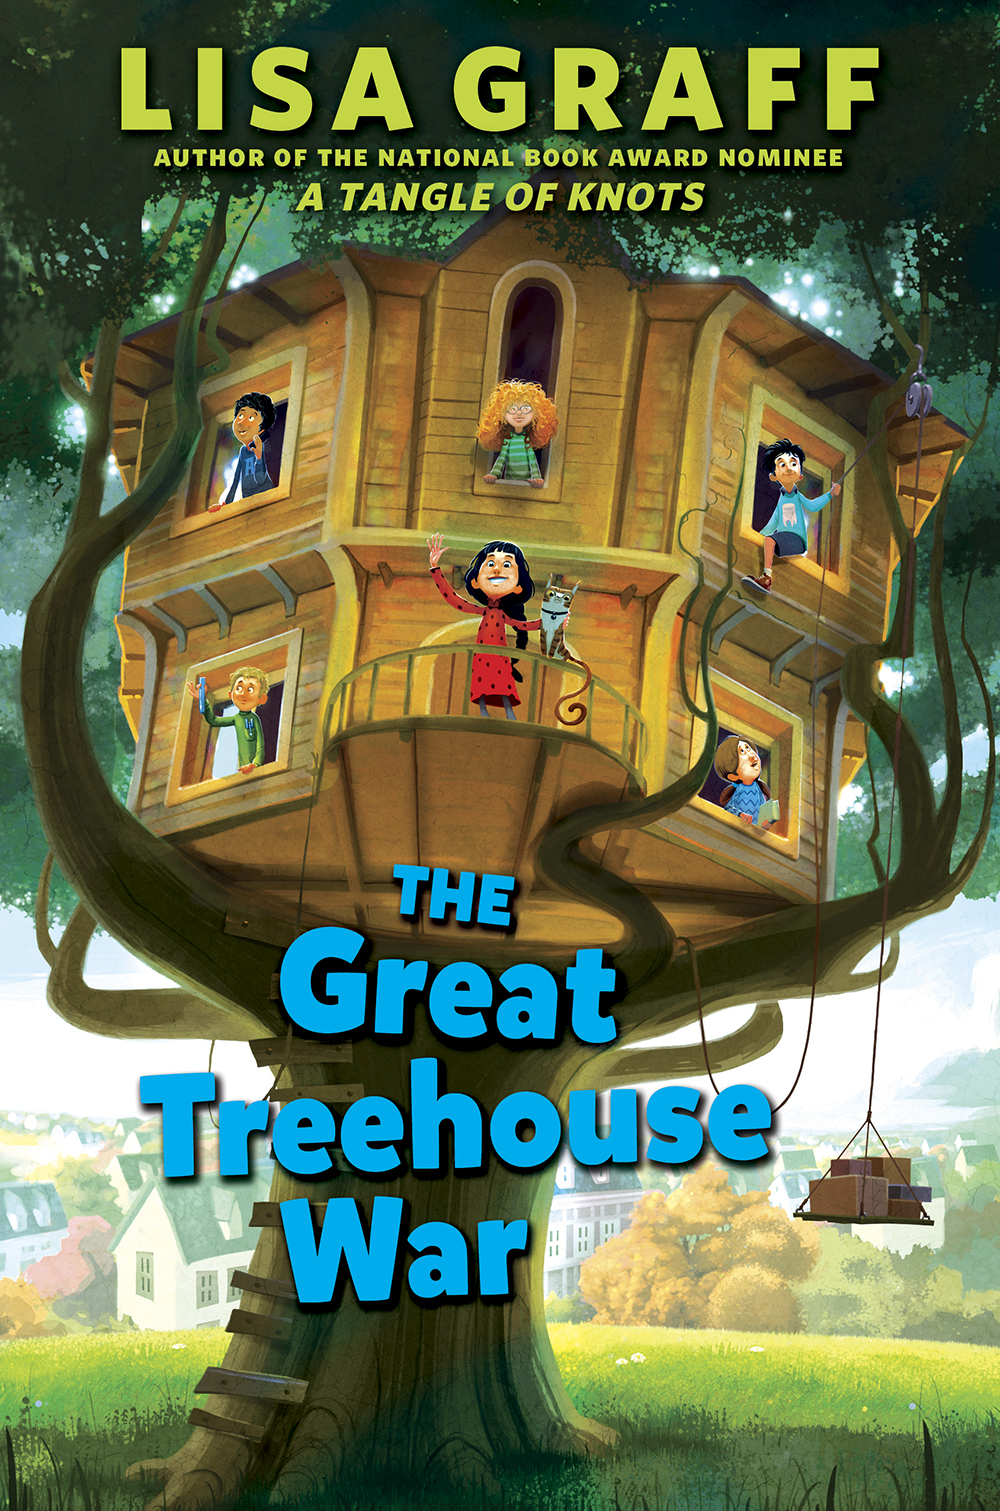 The Great Treehouse War, by Lisa Graff